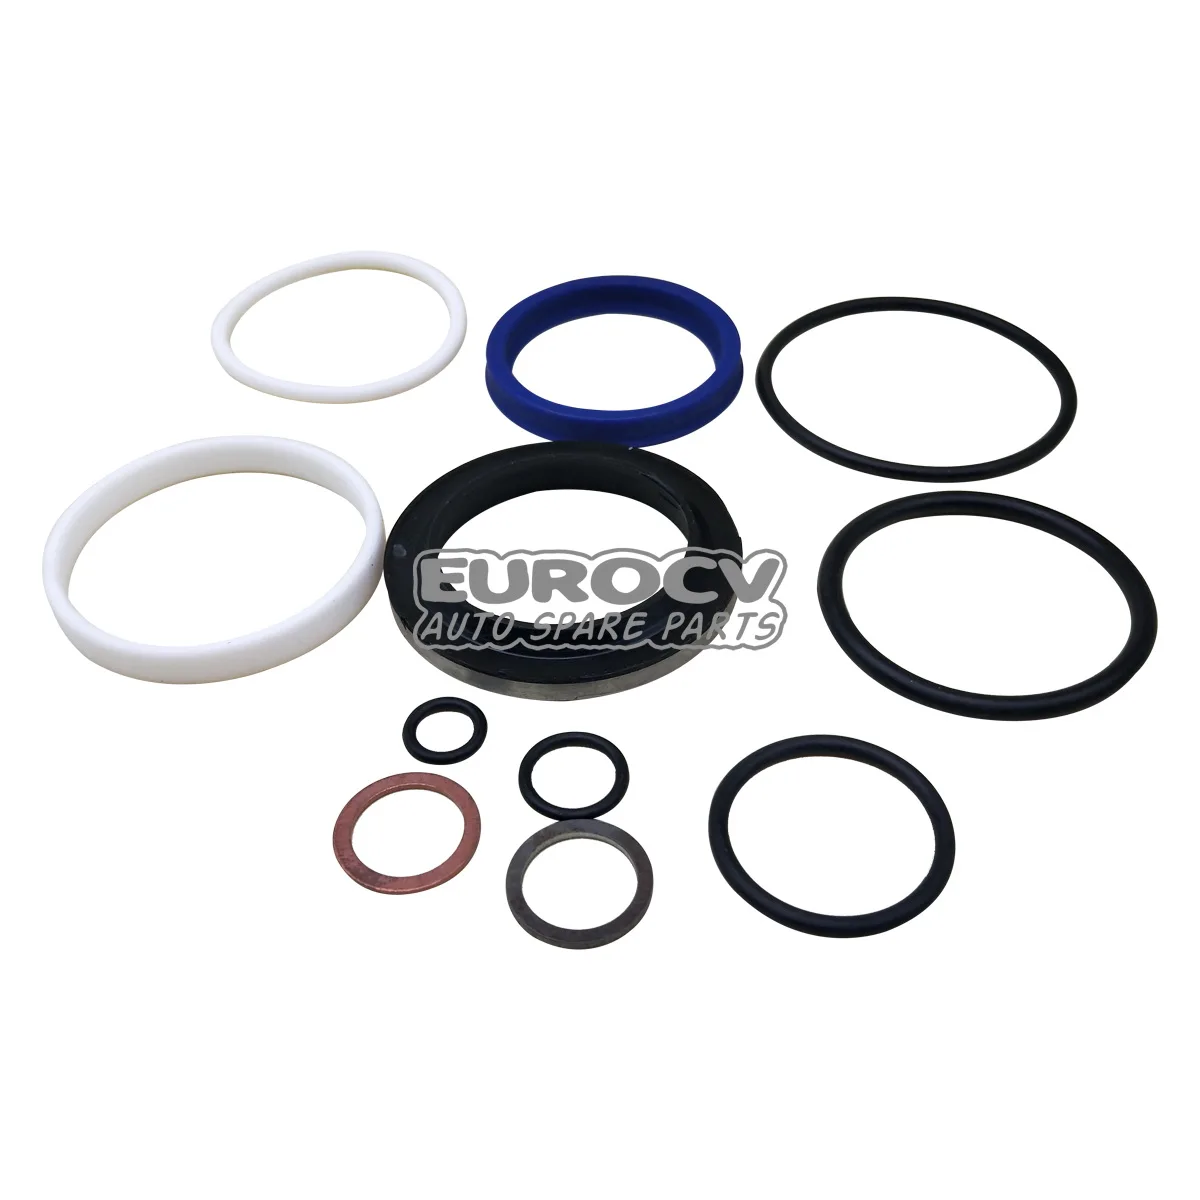 

Spare Parts for Scania Trucks SCE 1369053 Tilt Cylinder Repair Kit